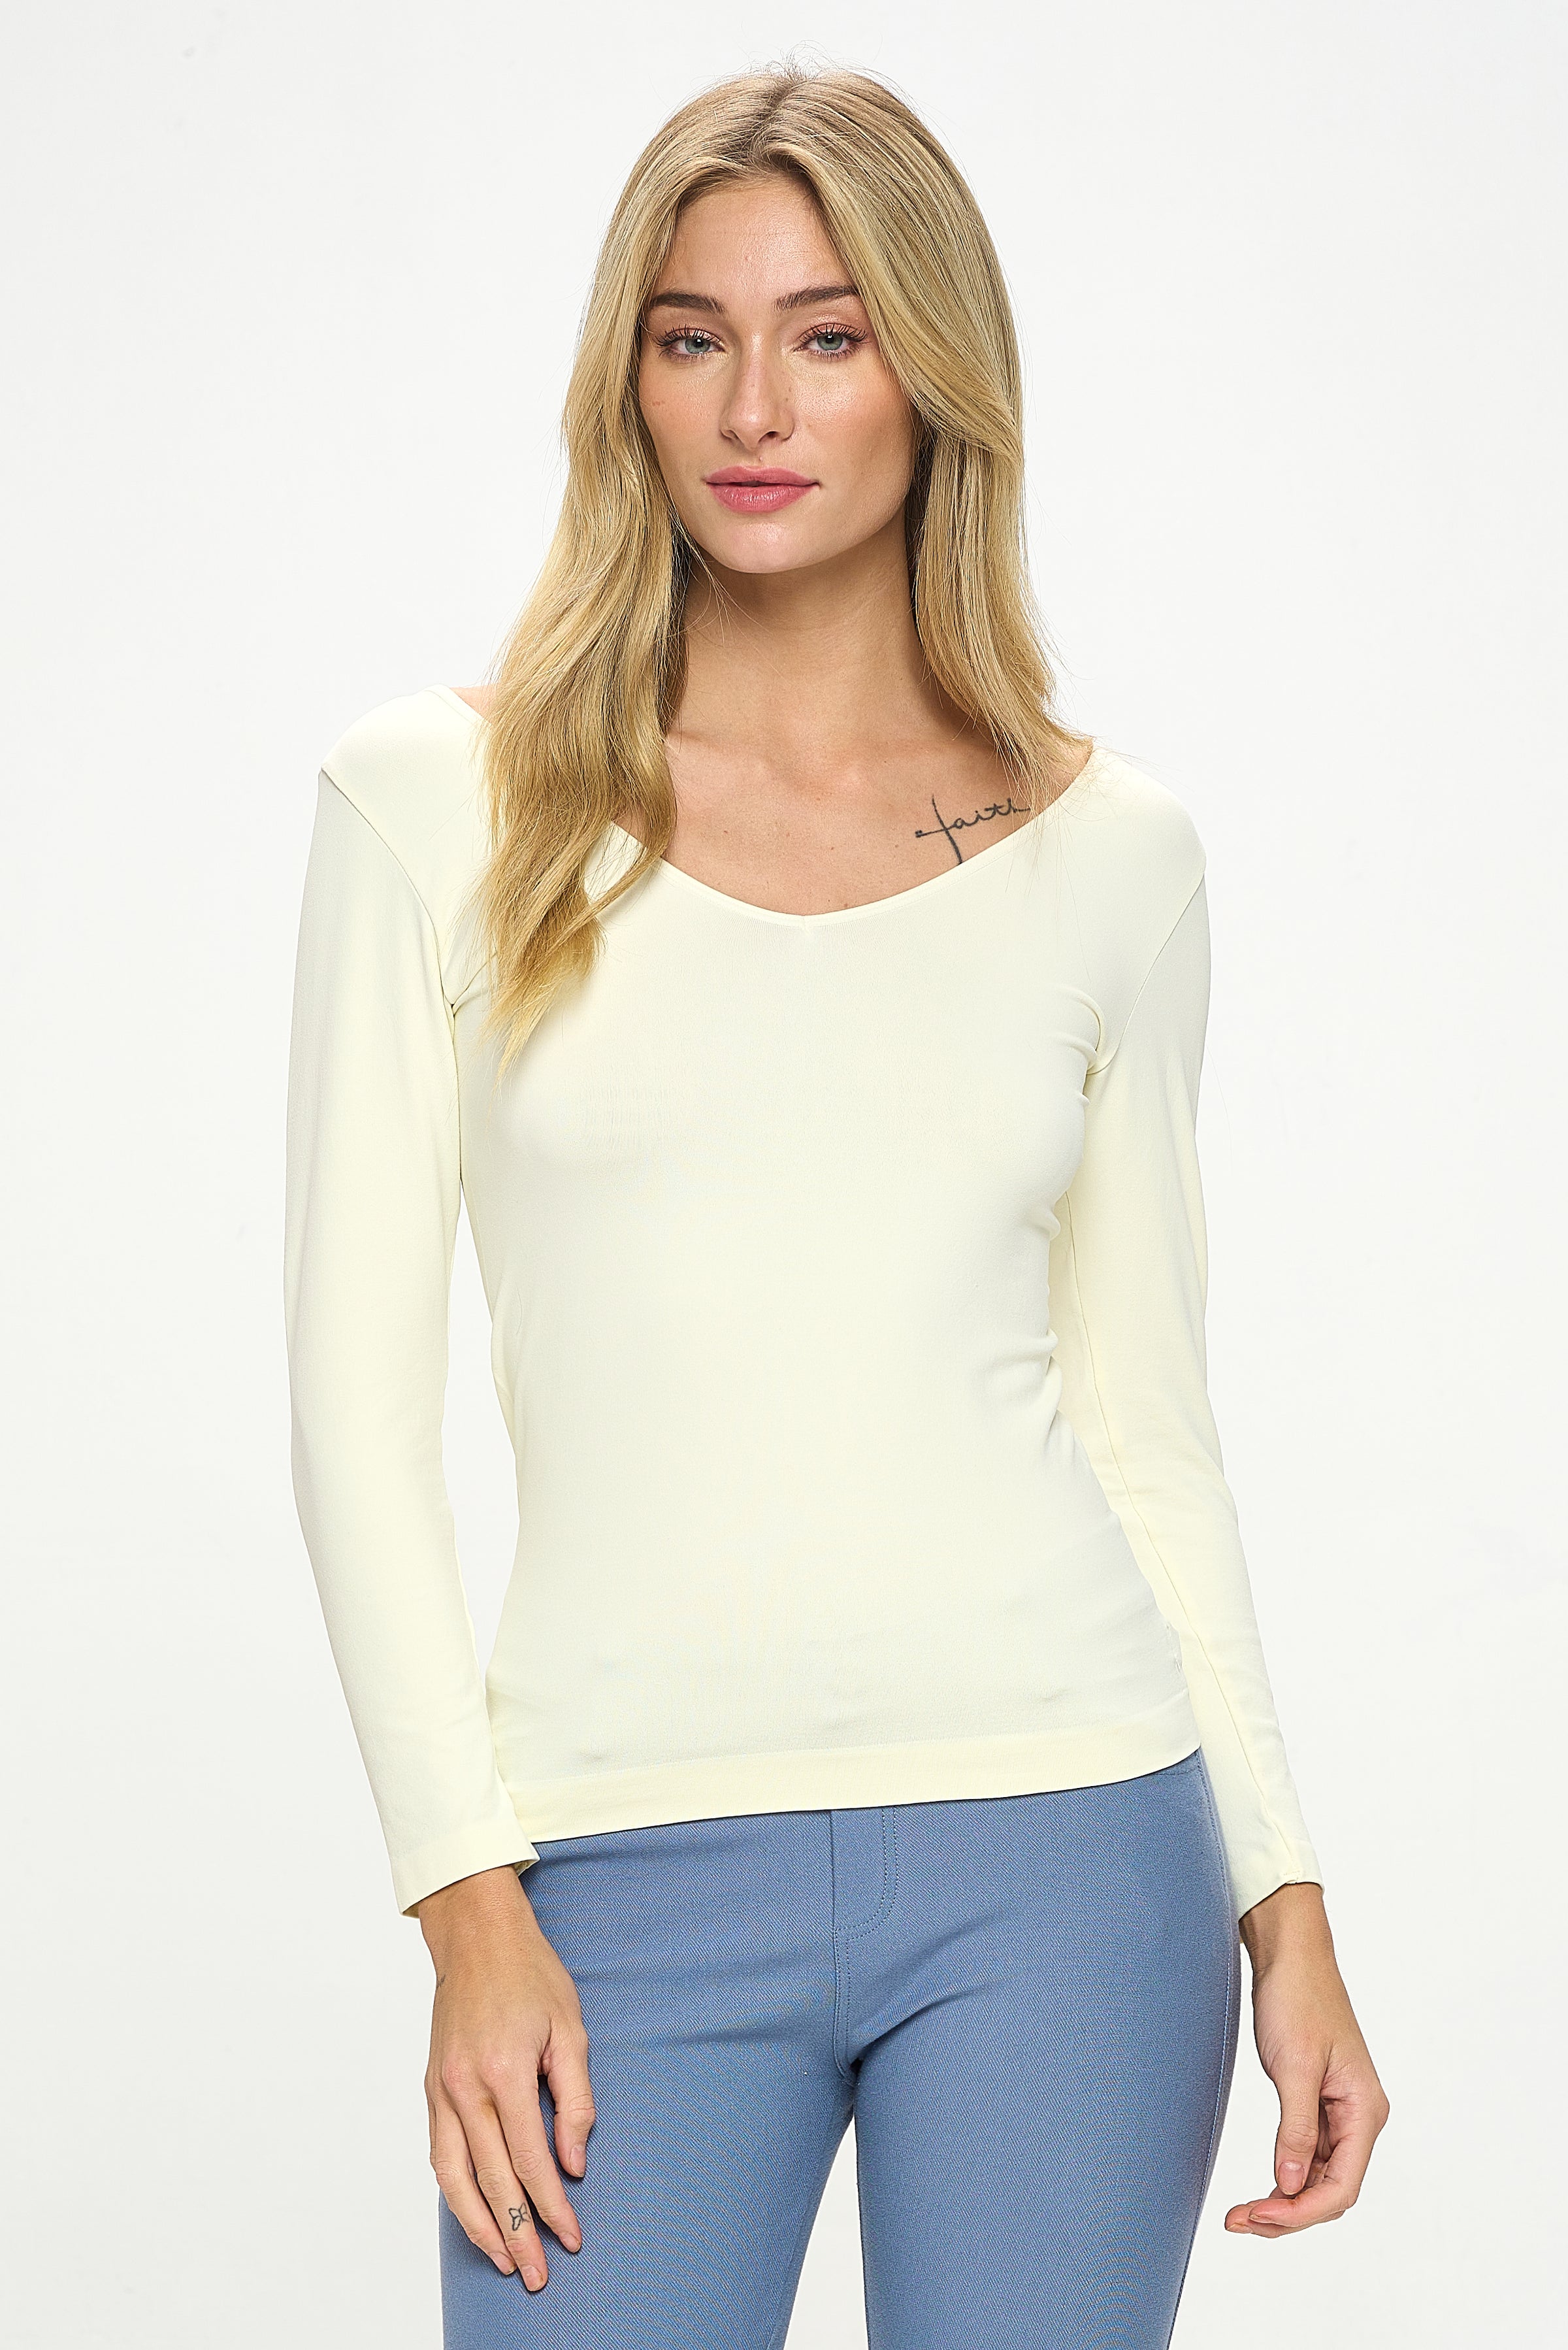 Women's Seamless Reversible V-Neck Long Sleeve Top, Nude, One Size 